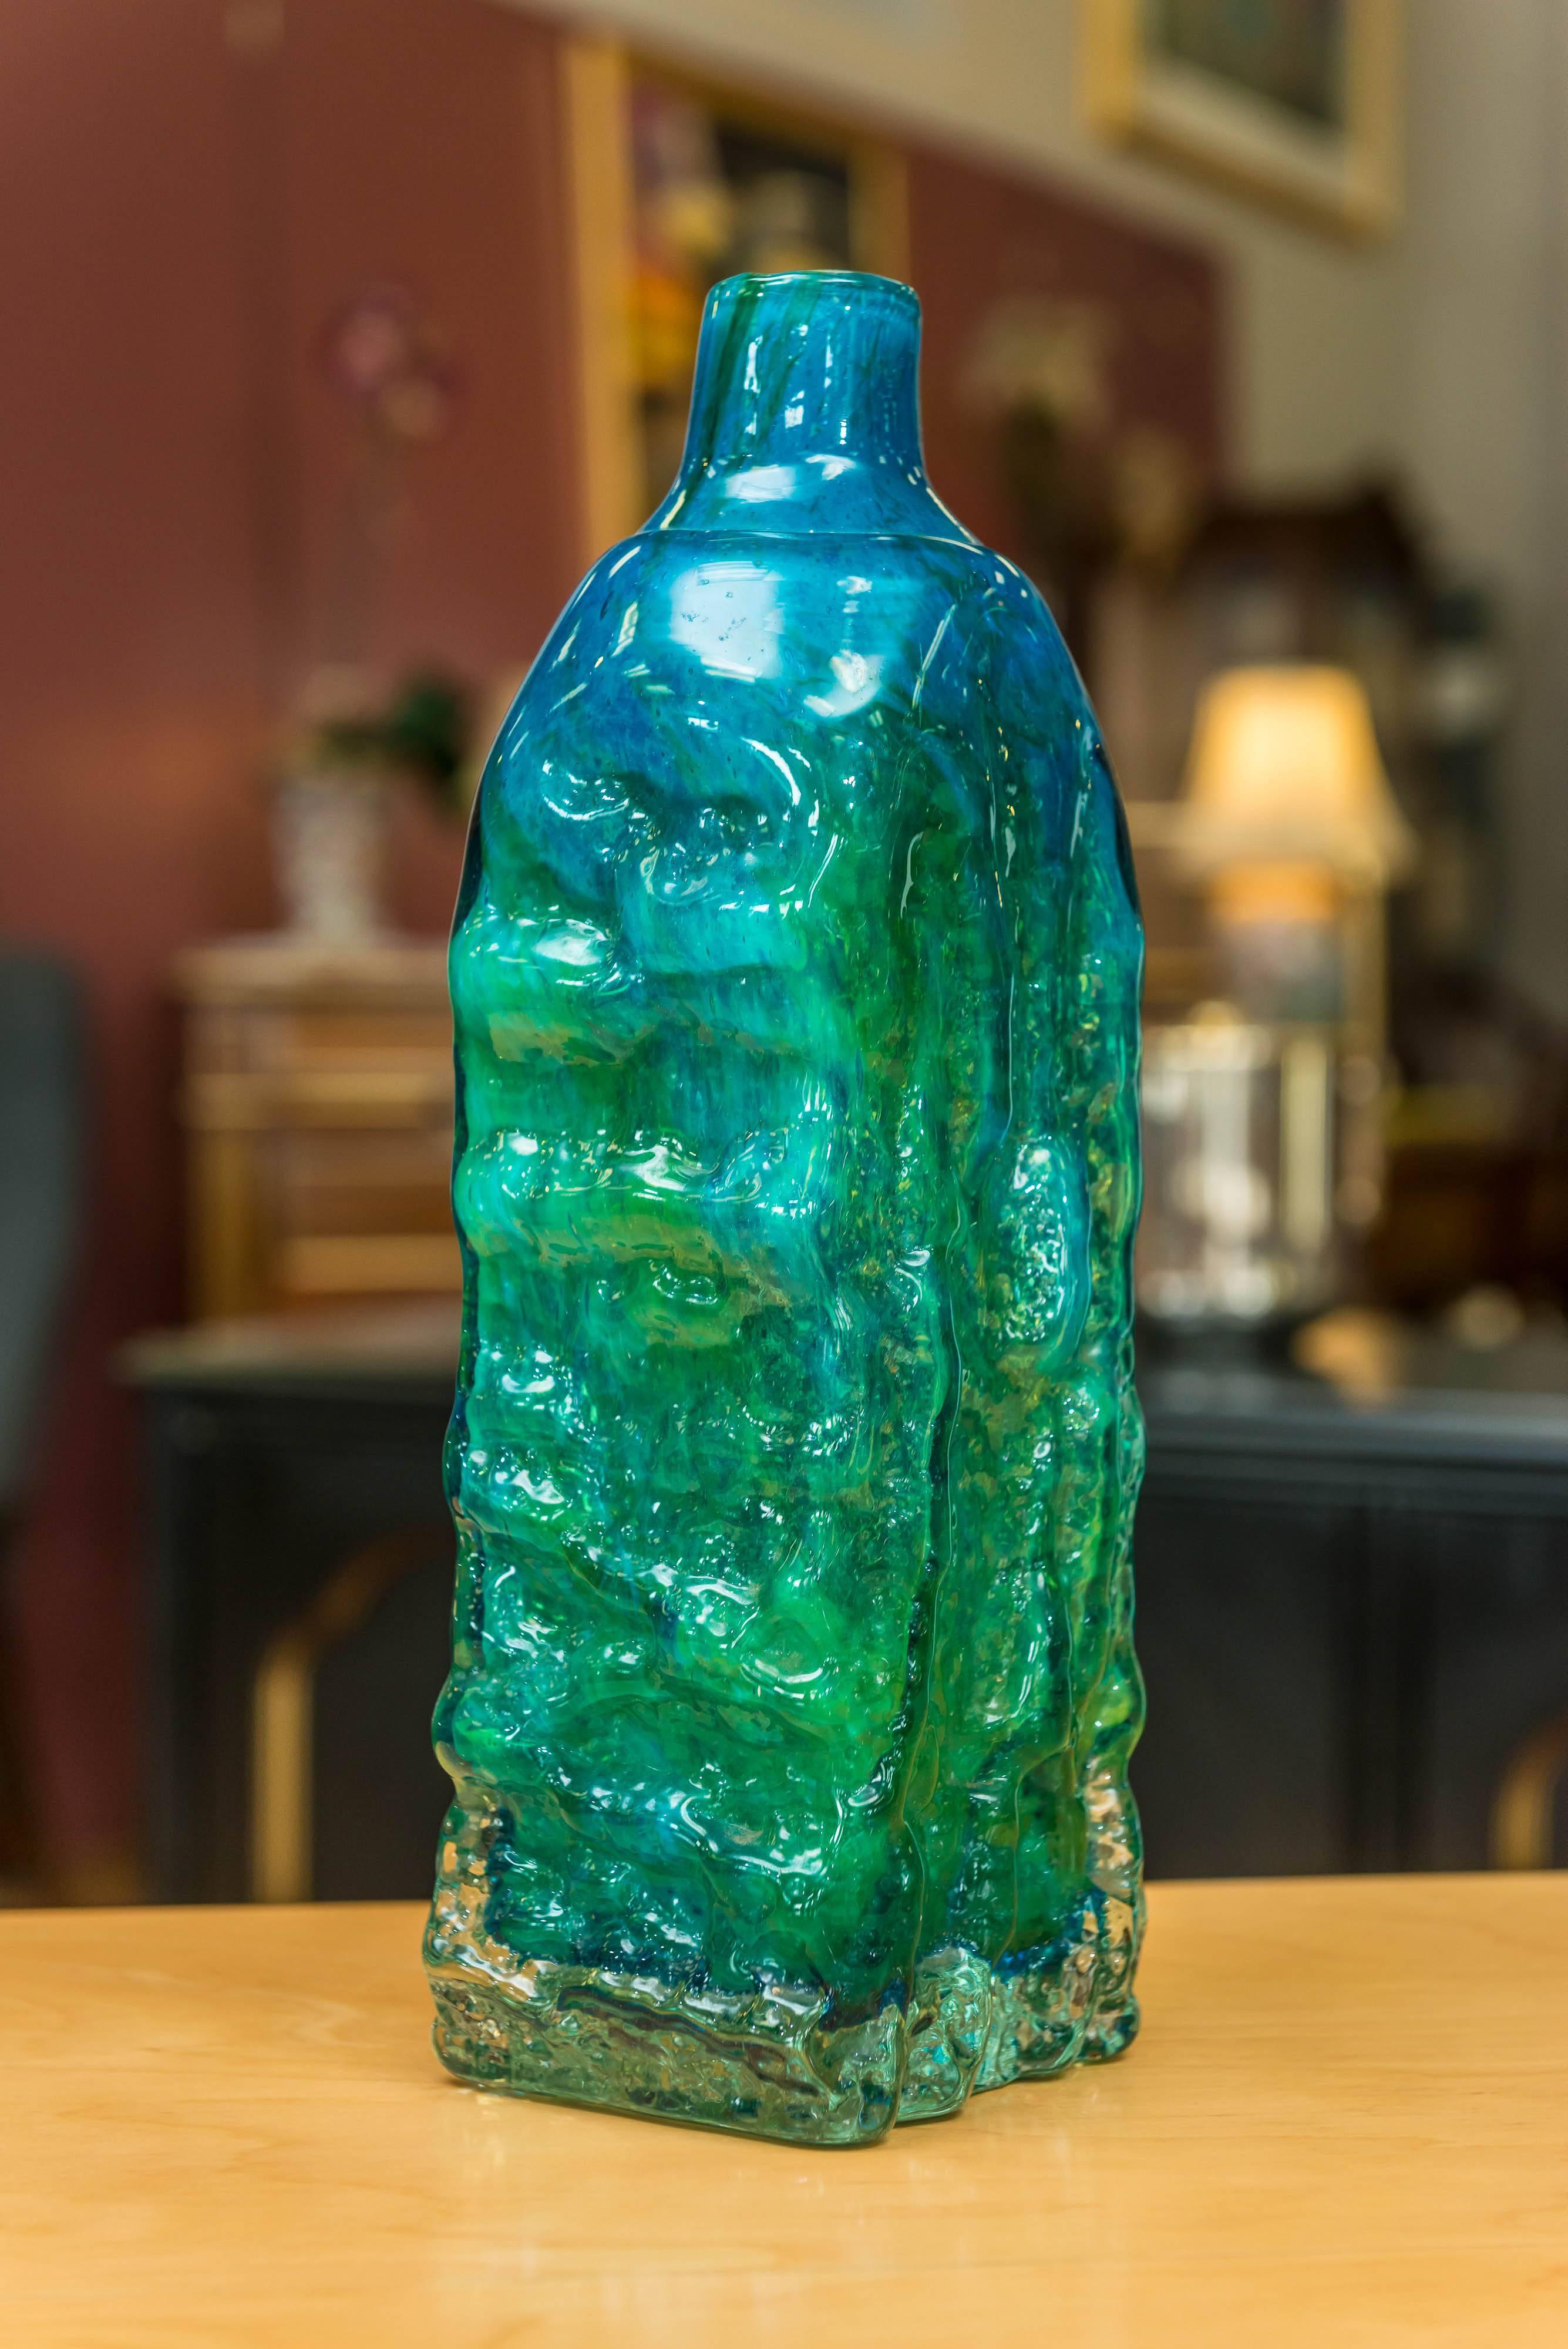 An uncommon and influential large glass bottle vase designed by Royal College of Art lecturer and Maltese Glass Industries – soon rechristened Mdina Glass – founder Michael Harris (1933-1994). Inspired by Scandinavian artisans and environs while